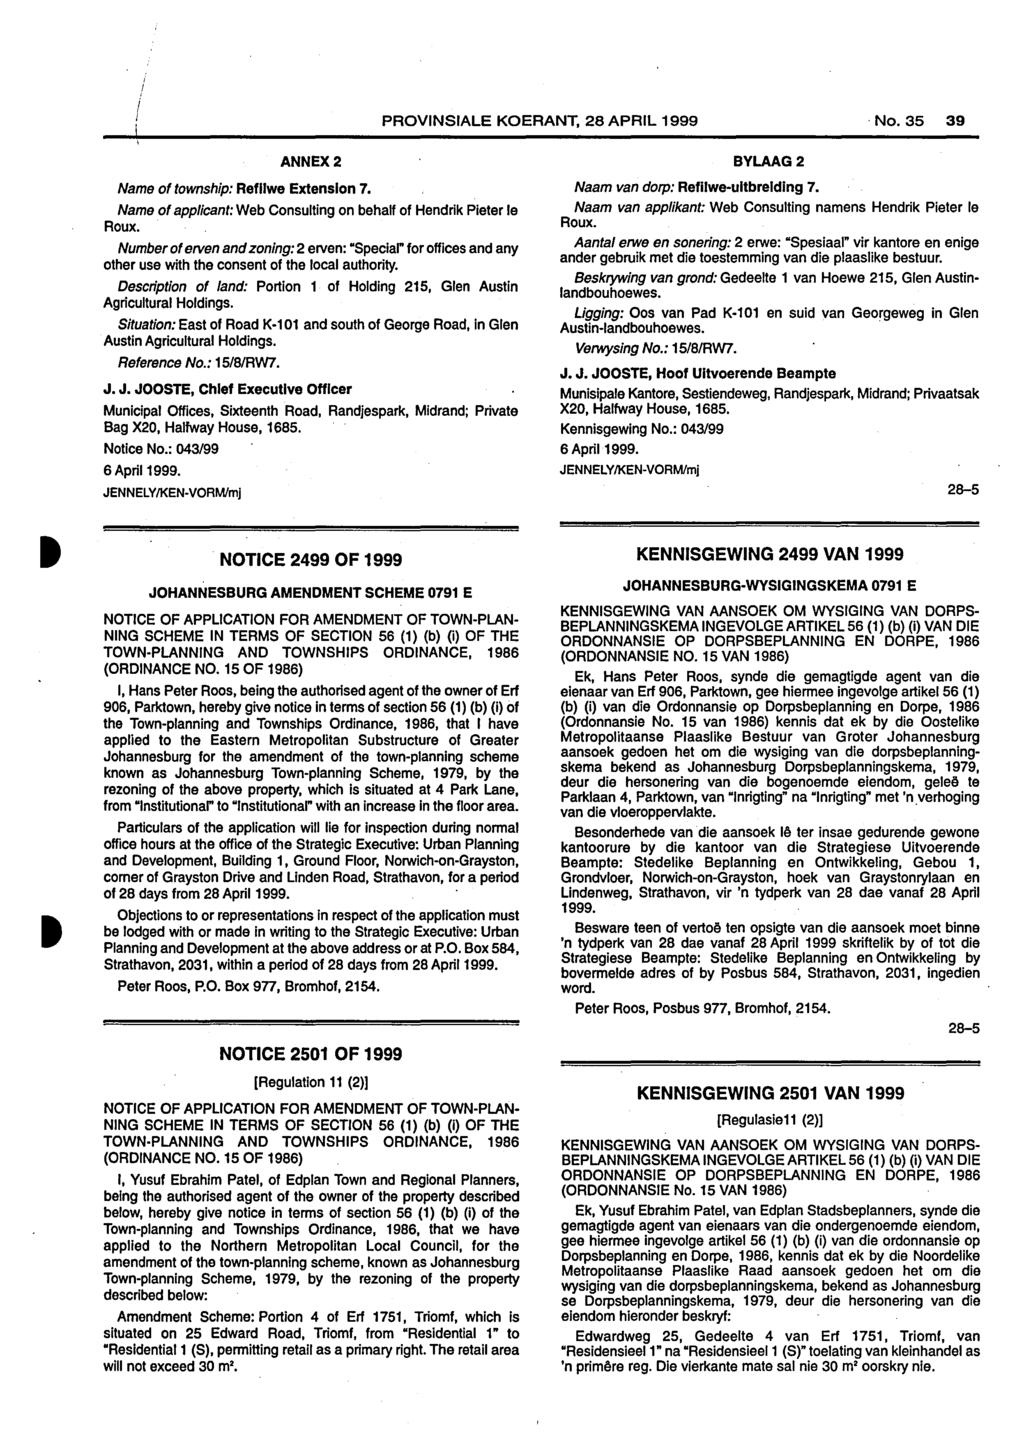 PROVINSIALE KOERANT, 28 APRIL 1999 No. 35 39 ANNEX2 Name of township: Refllwe Extension 7. Name of applicant: Web Consulting on behalf of Hendrik Pieter le Roux.